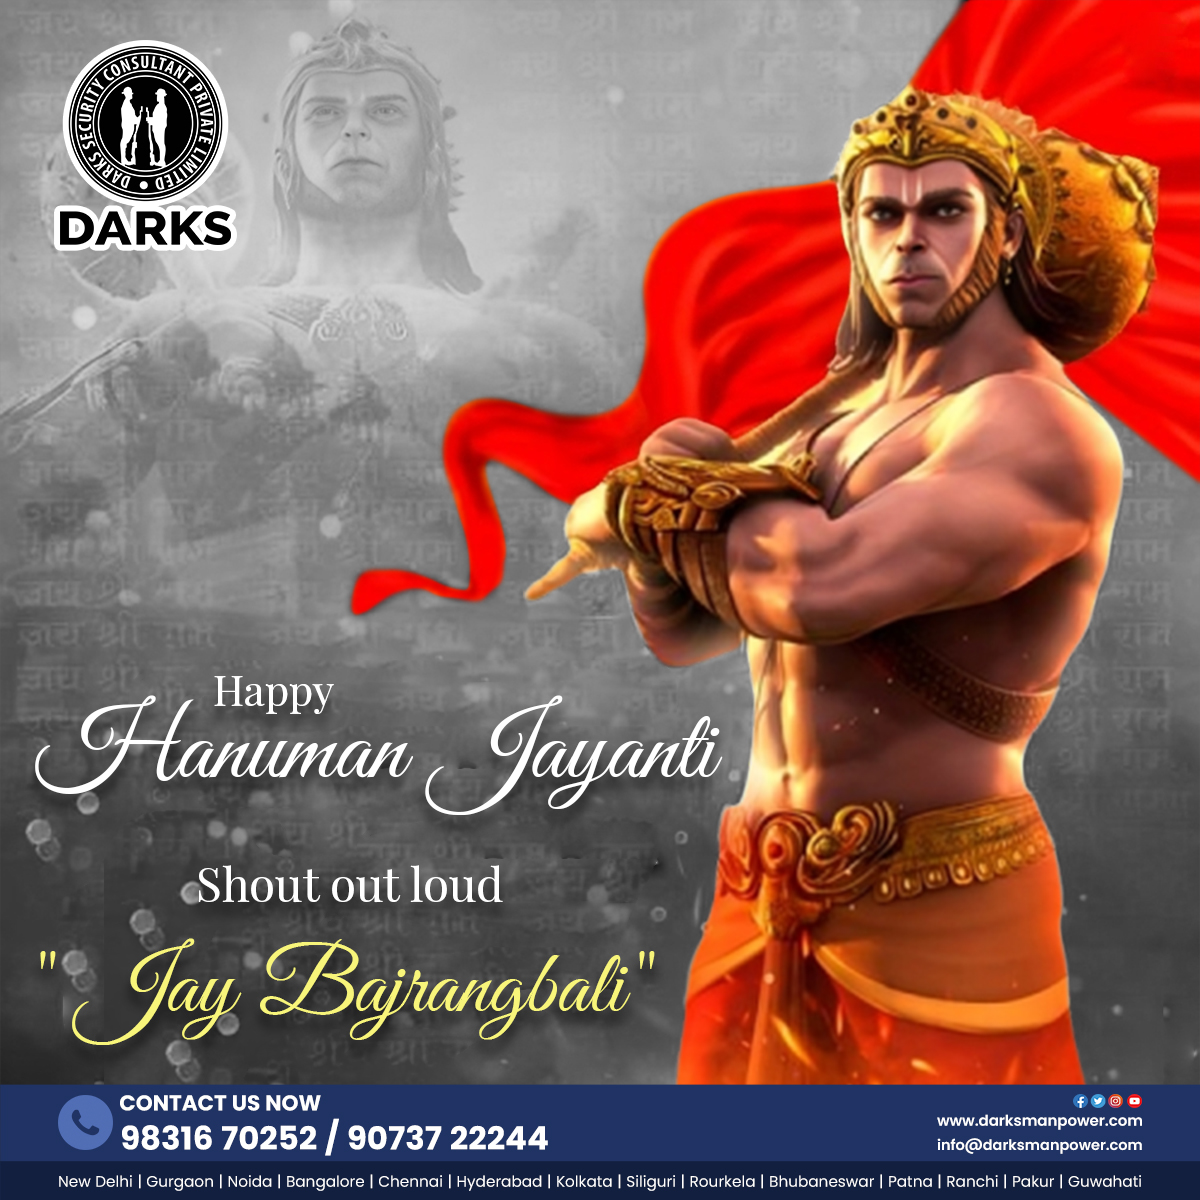 Celebrating the #strength and #devotion of Lord Hanuman that keeps the universe safe and #secured. Happy Hanuman Jayanti.🚩🛕

#hanumanjayanti #hanuman #HanumanJayanti2024 #HanumanJayantiFestival #pawanputra #darksmanpower